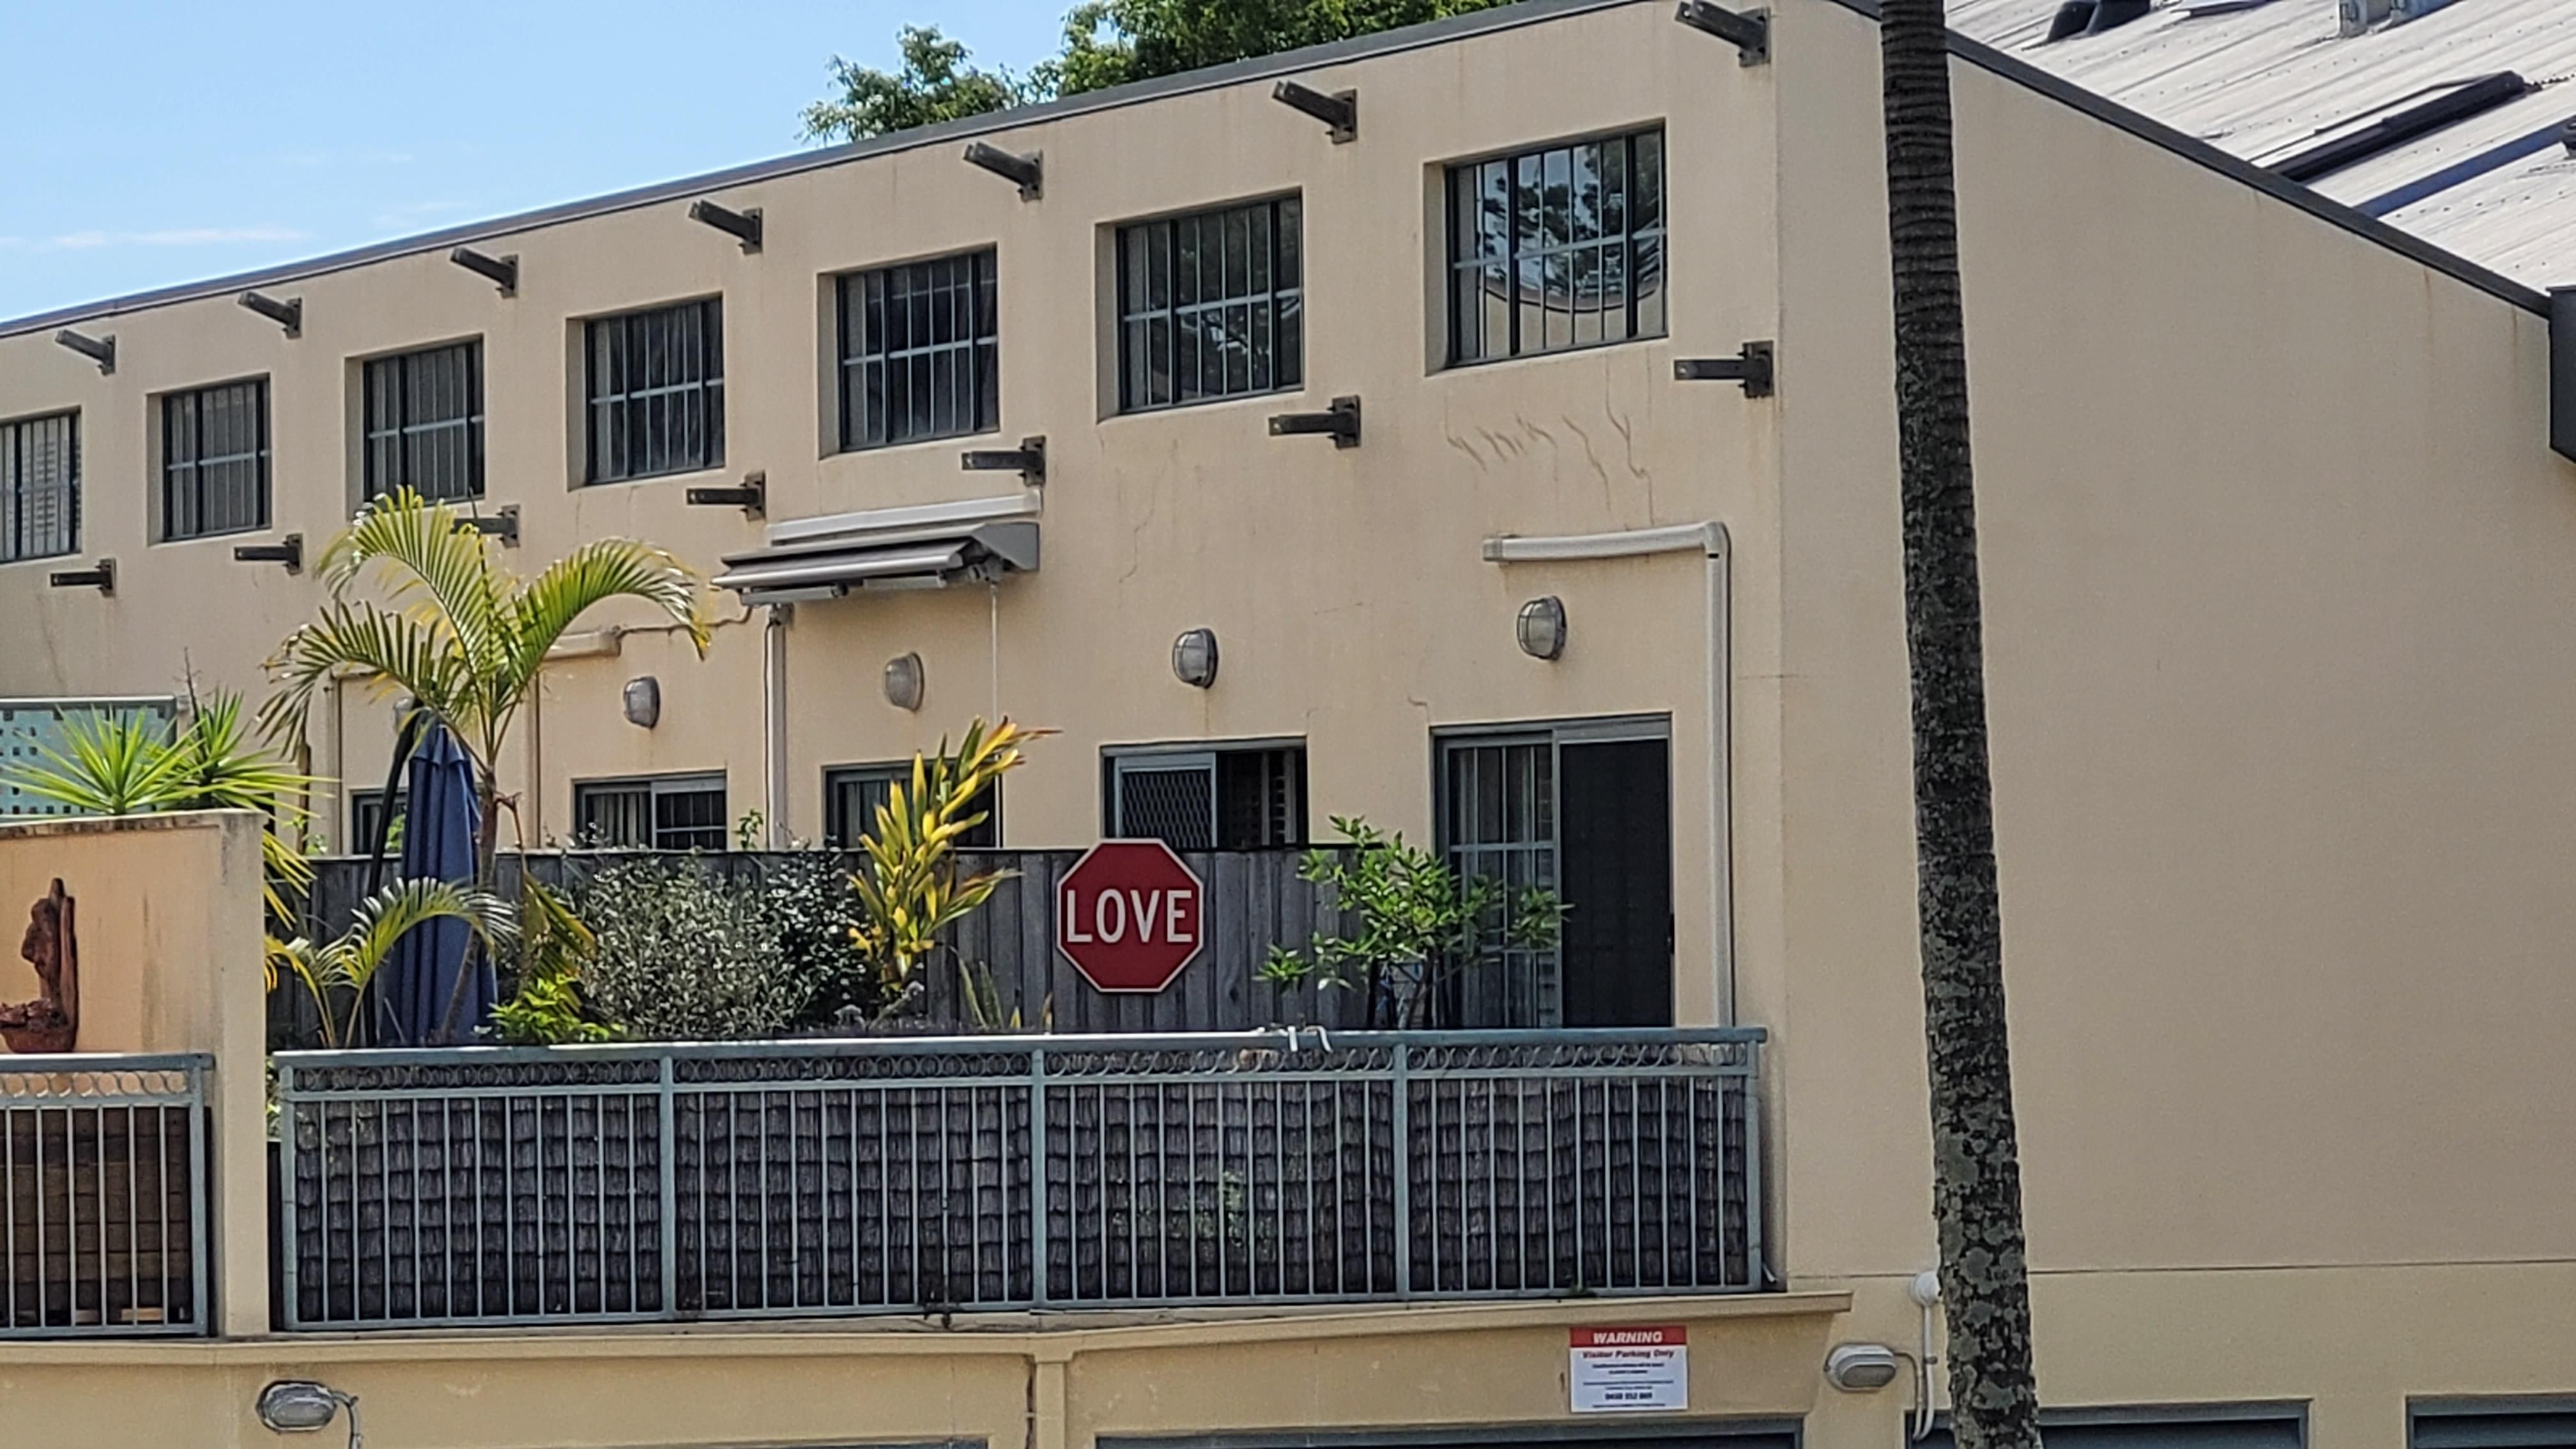 My neighbor just hung this sign up. Still trying to work out if it's pro love or saying stop love